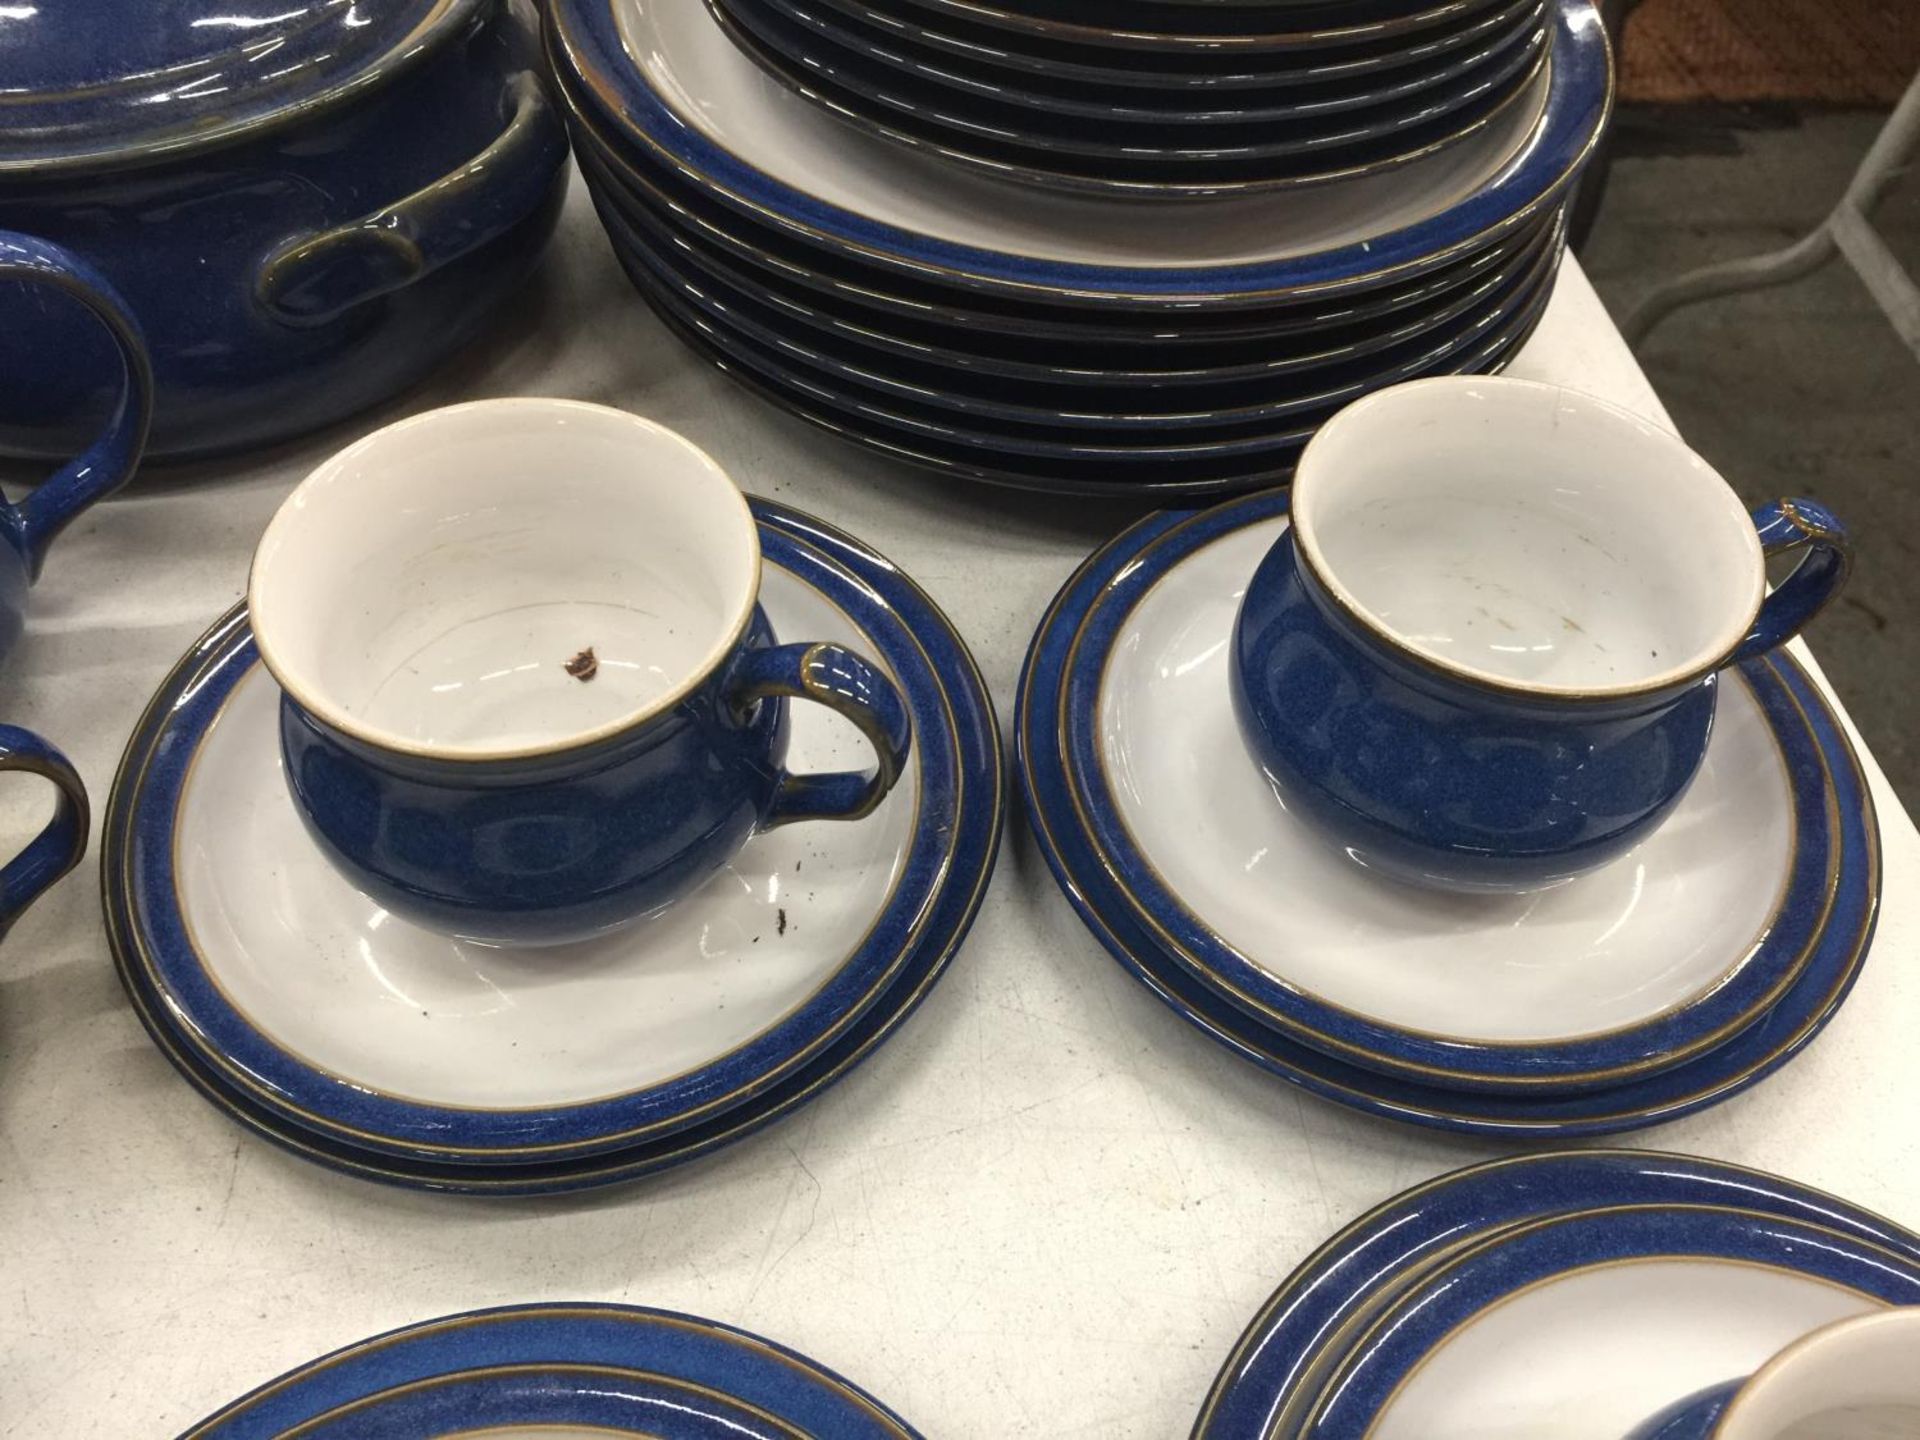 A DENBY DINNER SERVICE IN BLUE TO INCLUDE PLATES, BOWLS, TEAPOTS, SERVING TUREEN, MILK JUGS, SUGAR - Image 9 of 9